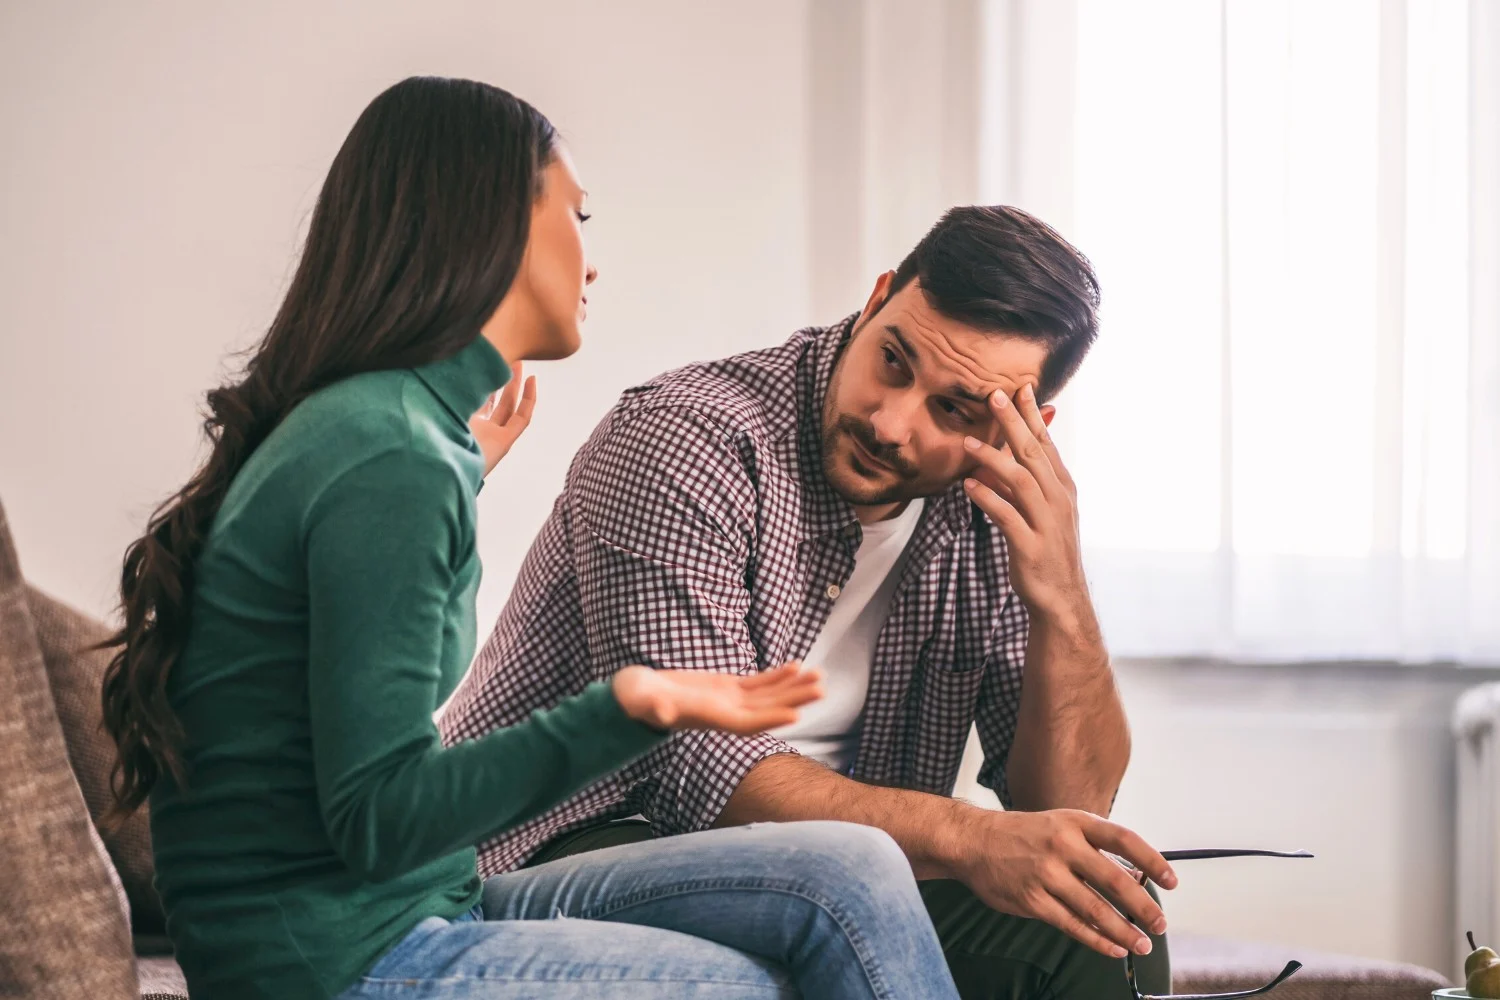 Essential Questions to Ask in a Broken Relationship